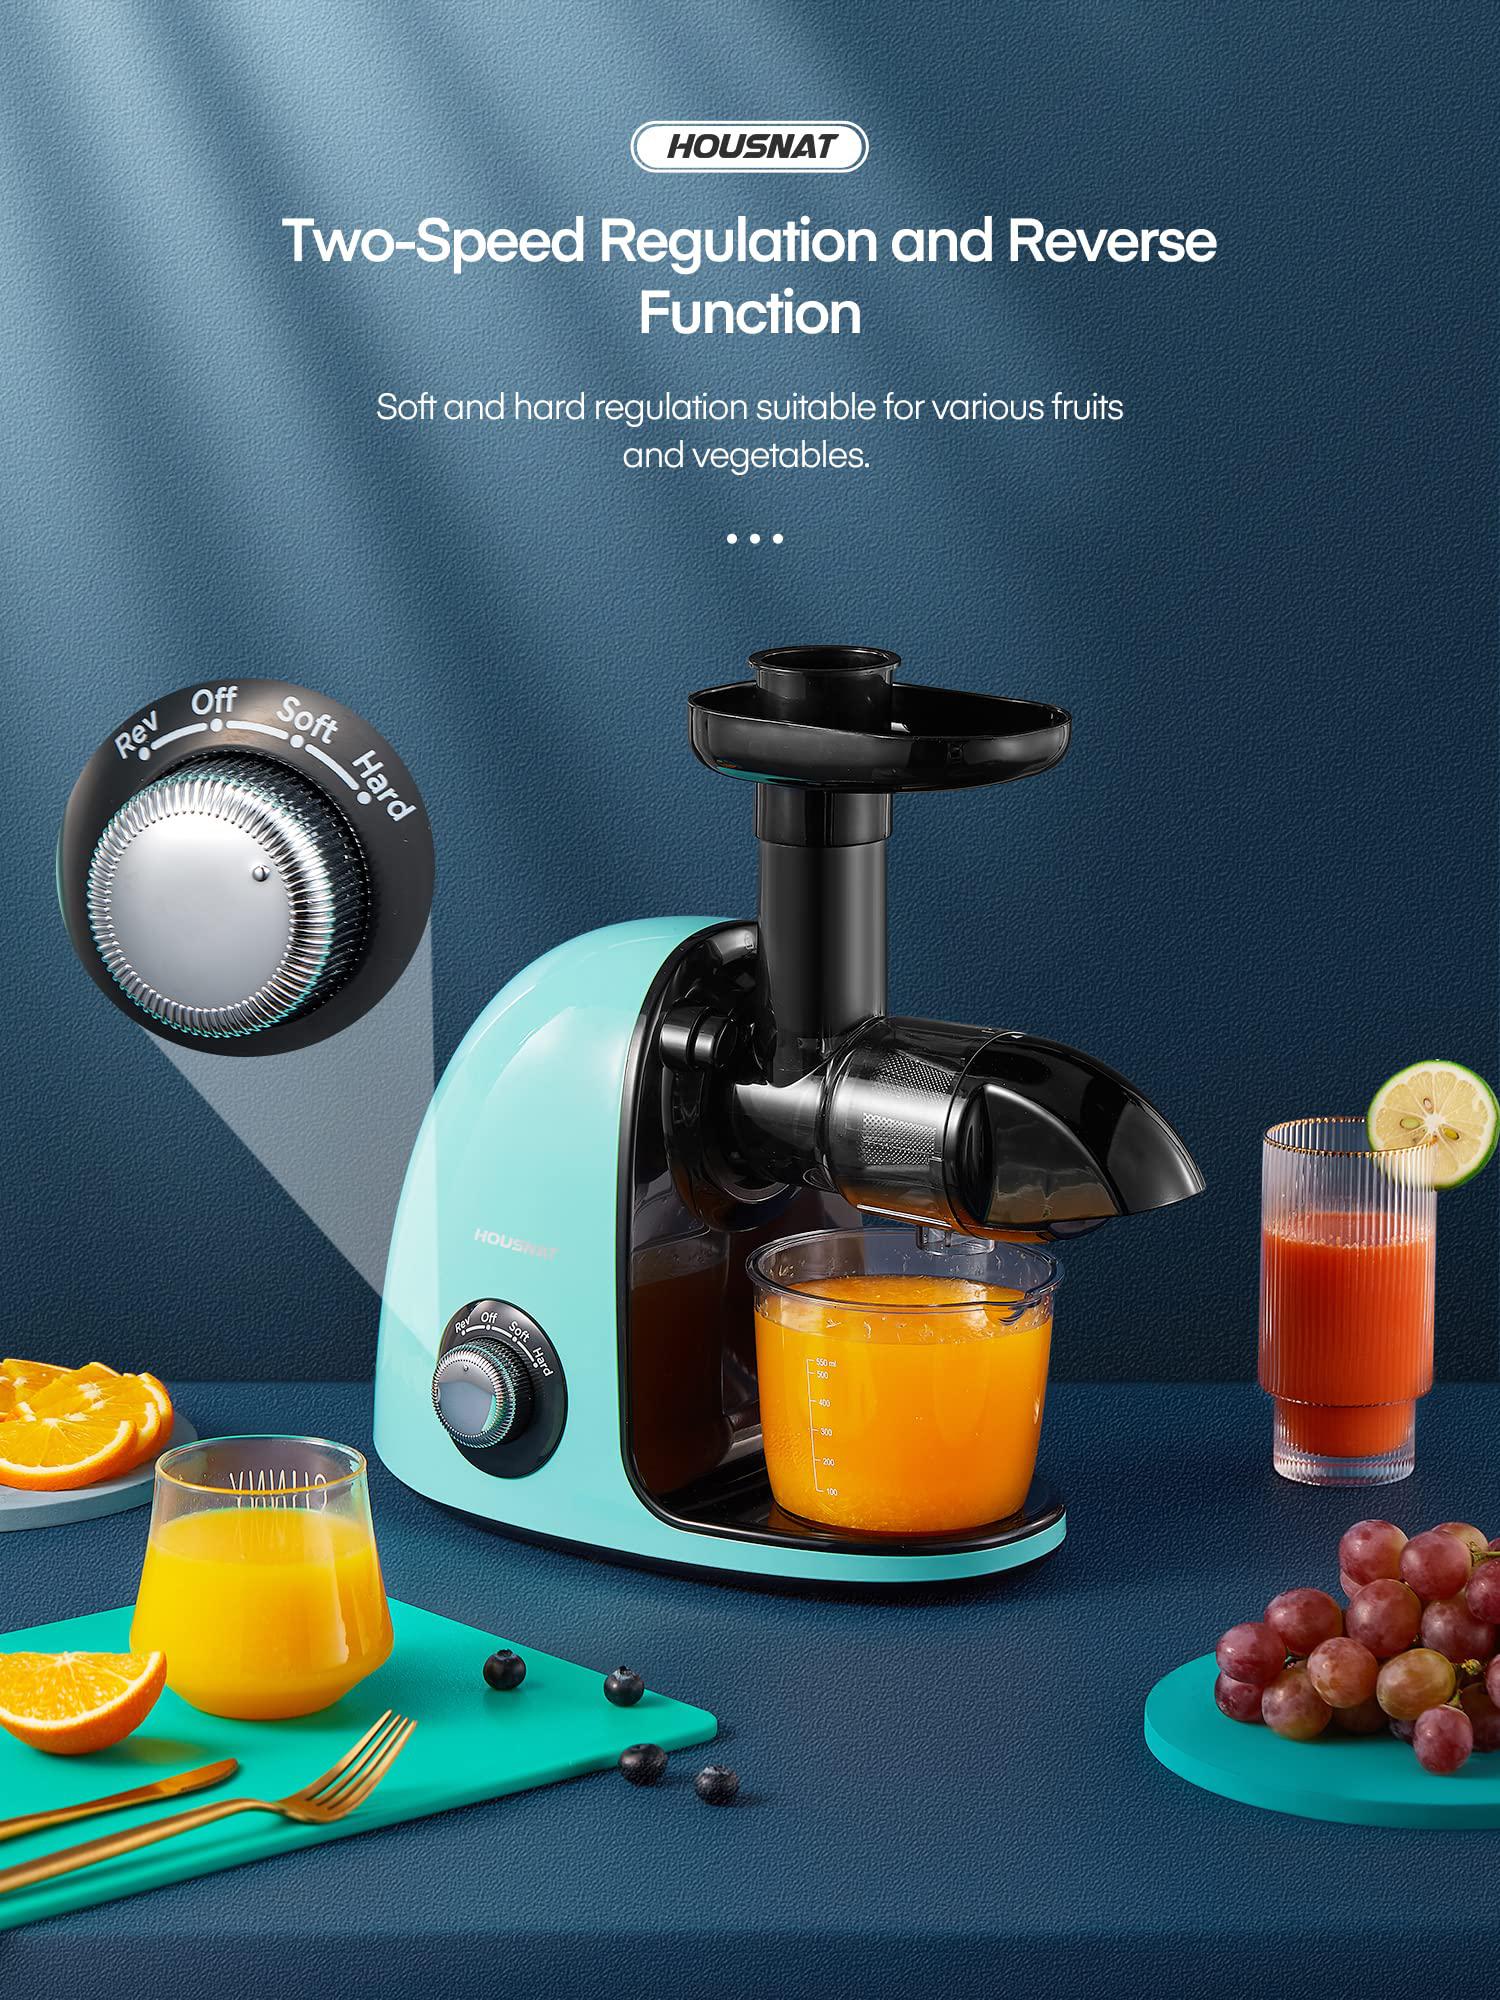 HOUSNAT juicer machines vegetable and fruit, housnat cold press juicer extractor with 2-speed modes easy to clean, slow masticating j